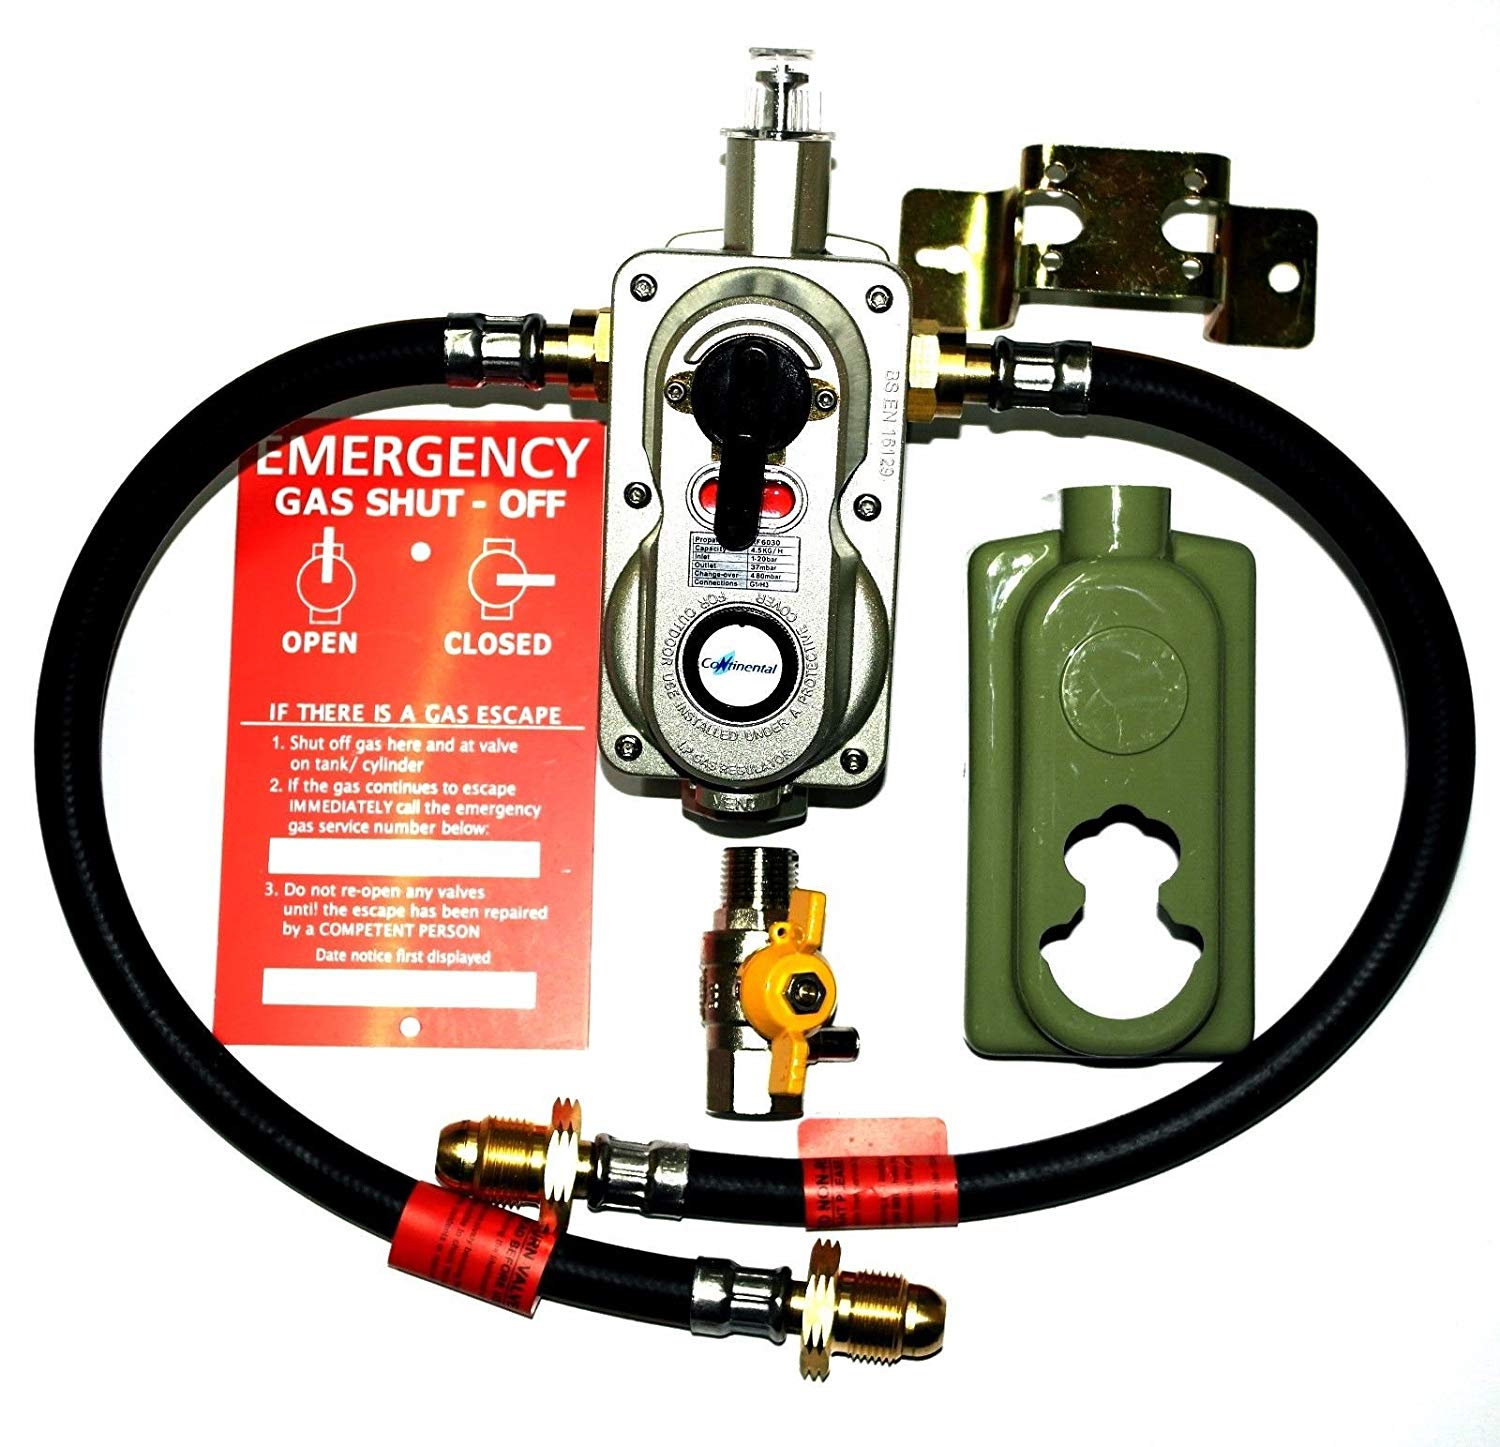 2 Cylinder Auto Chang-Over Propane Gas Regulator With Safety OPSO System Fitted 